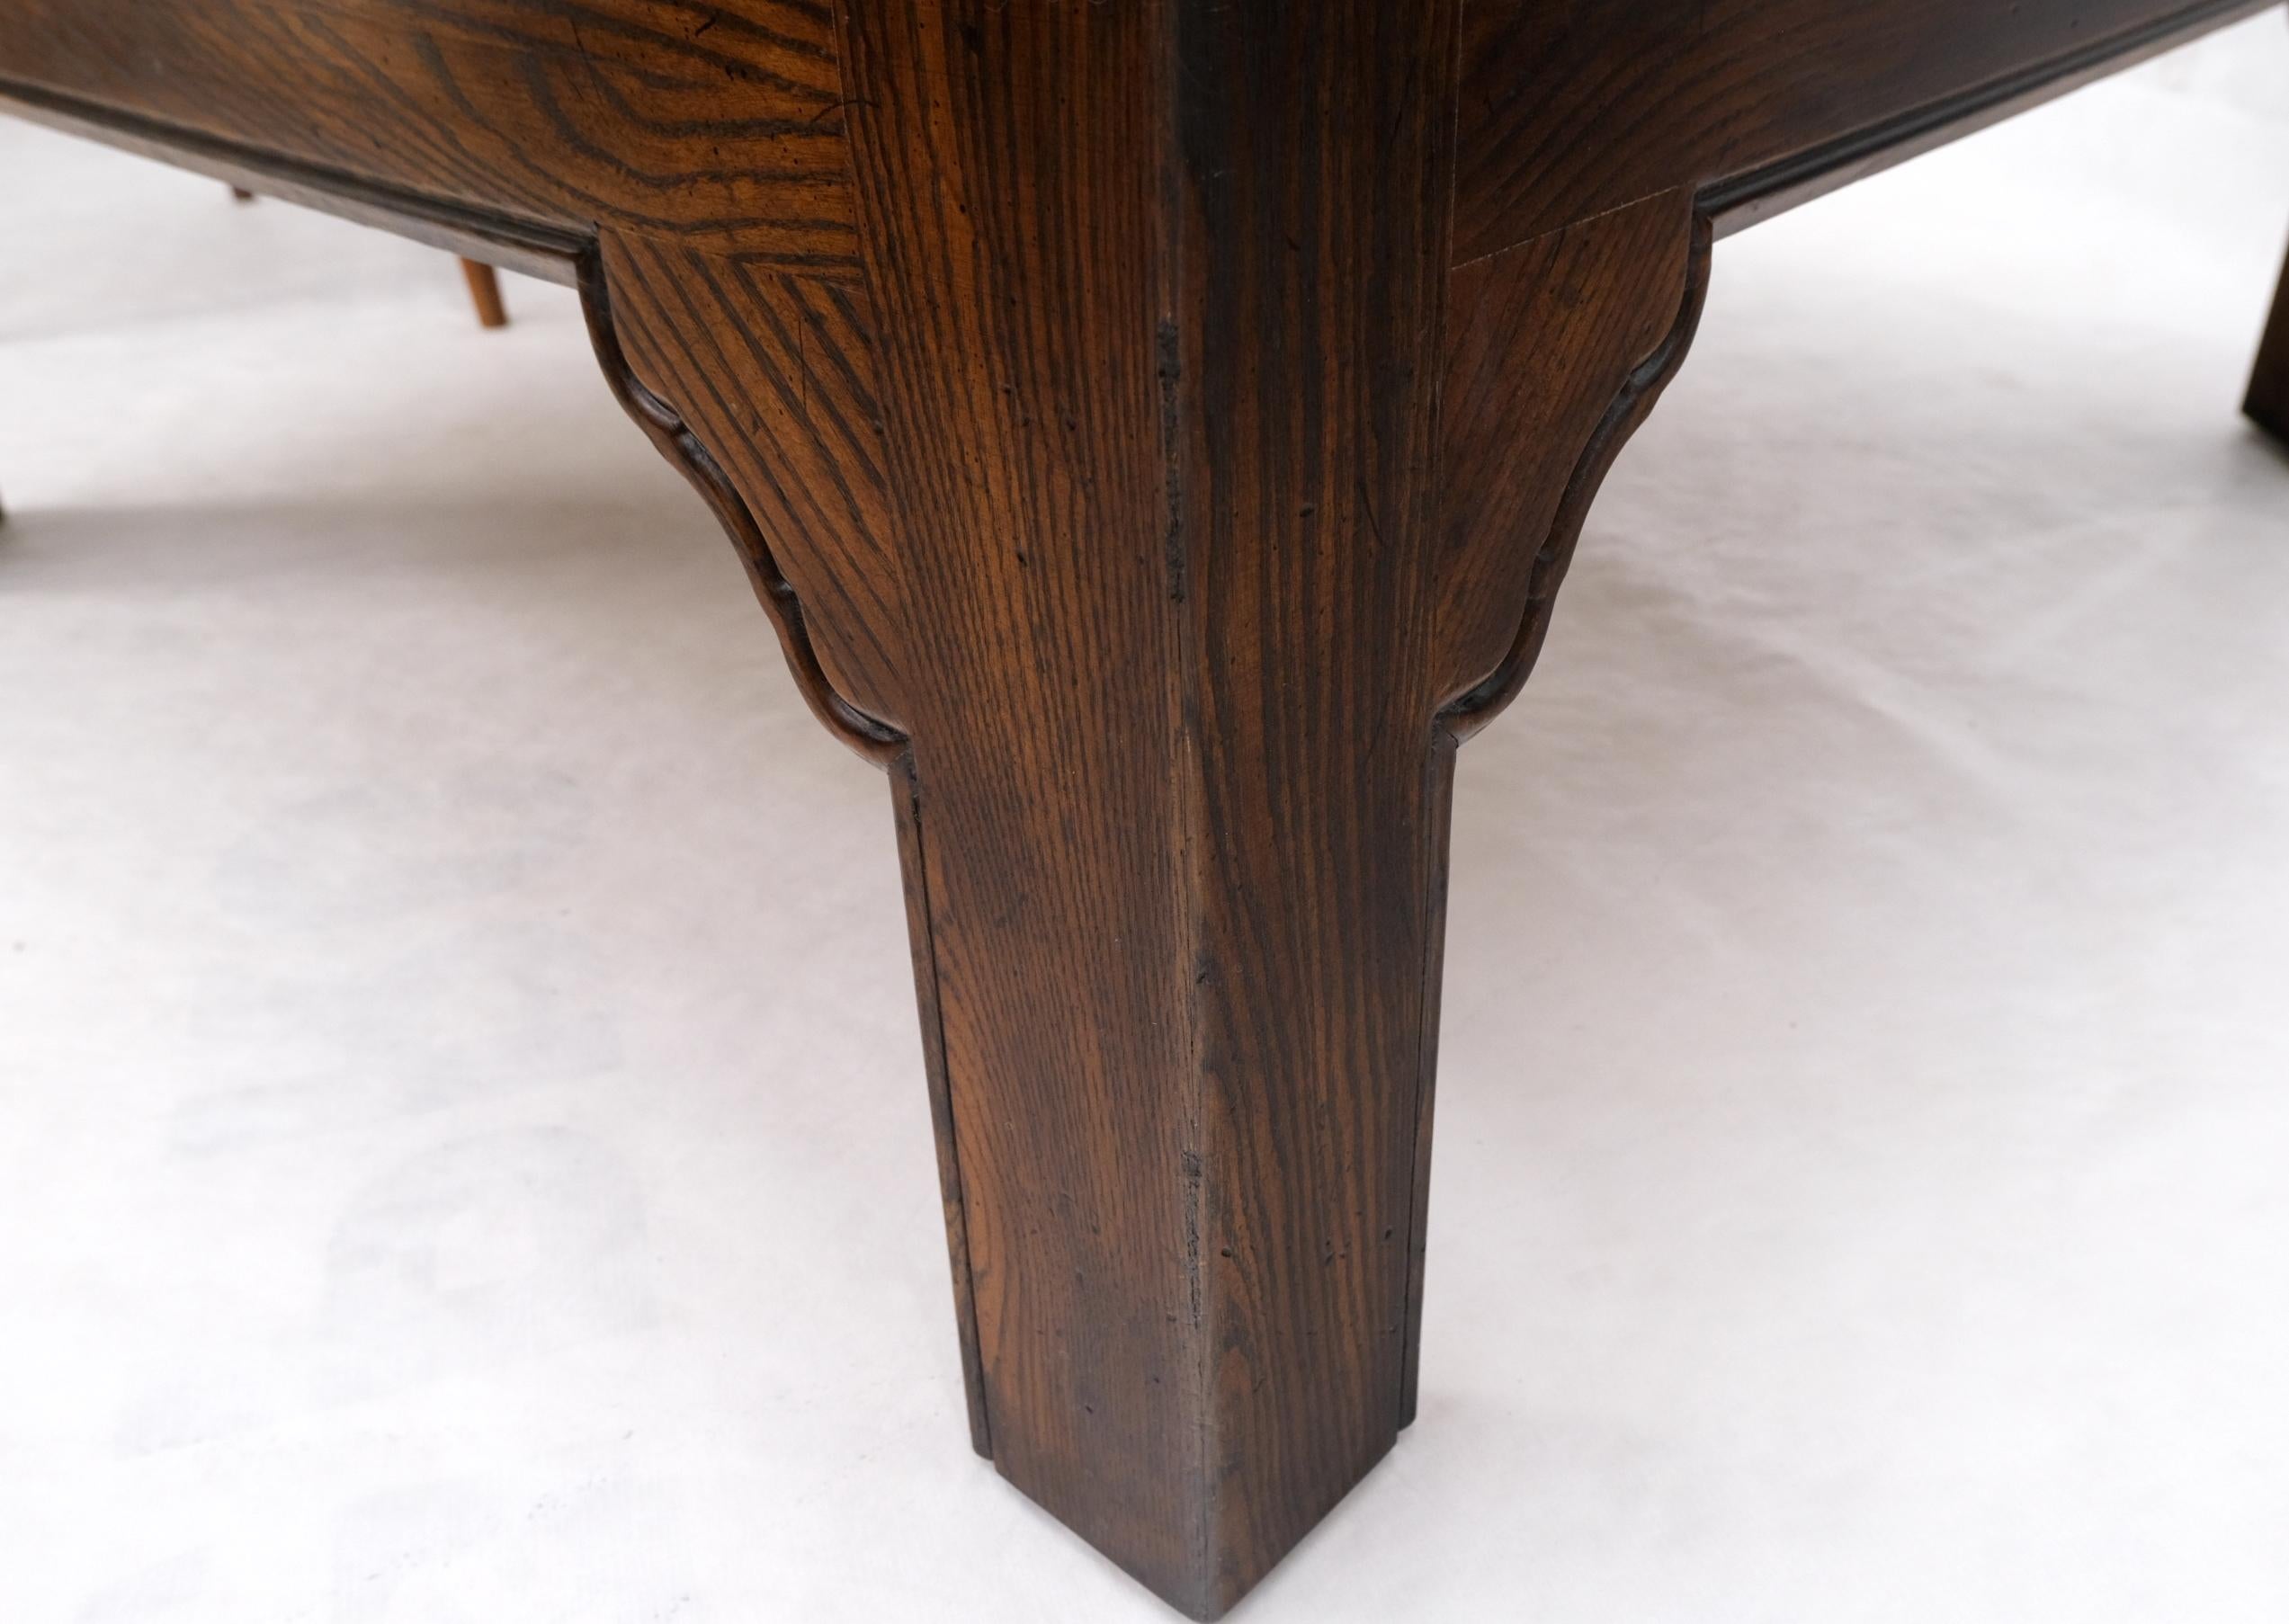 20th Century Large Square Parquetry Coffee Table by Henredon